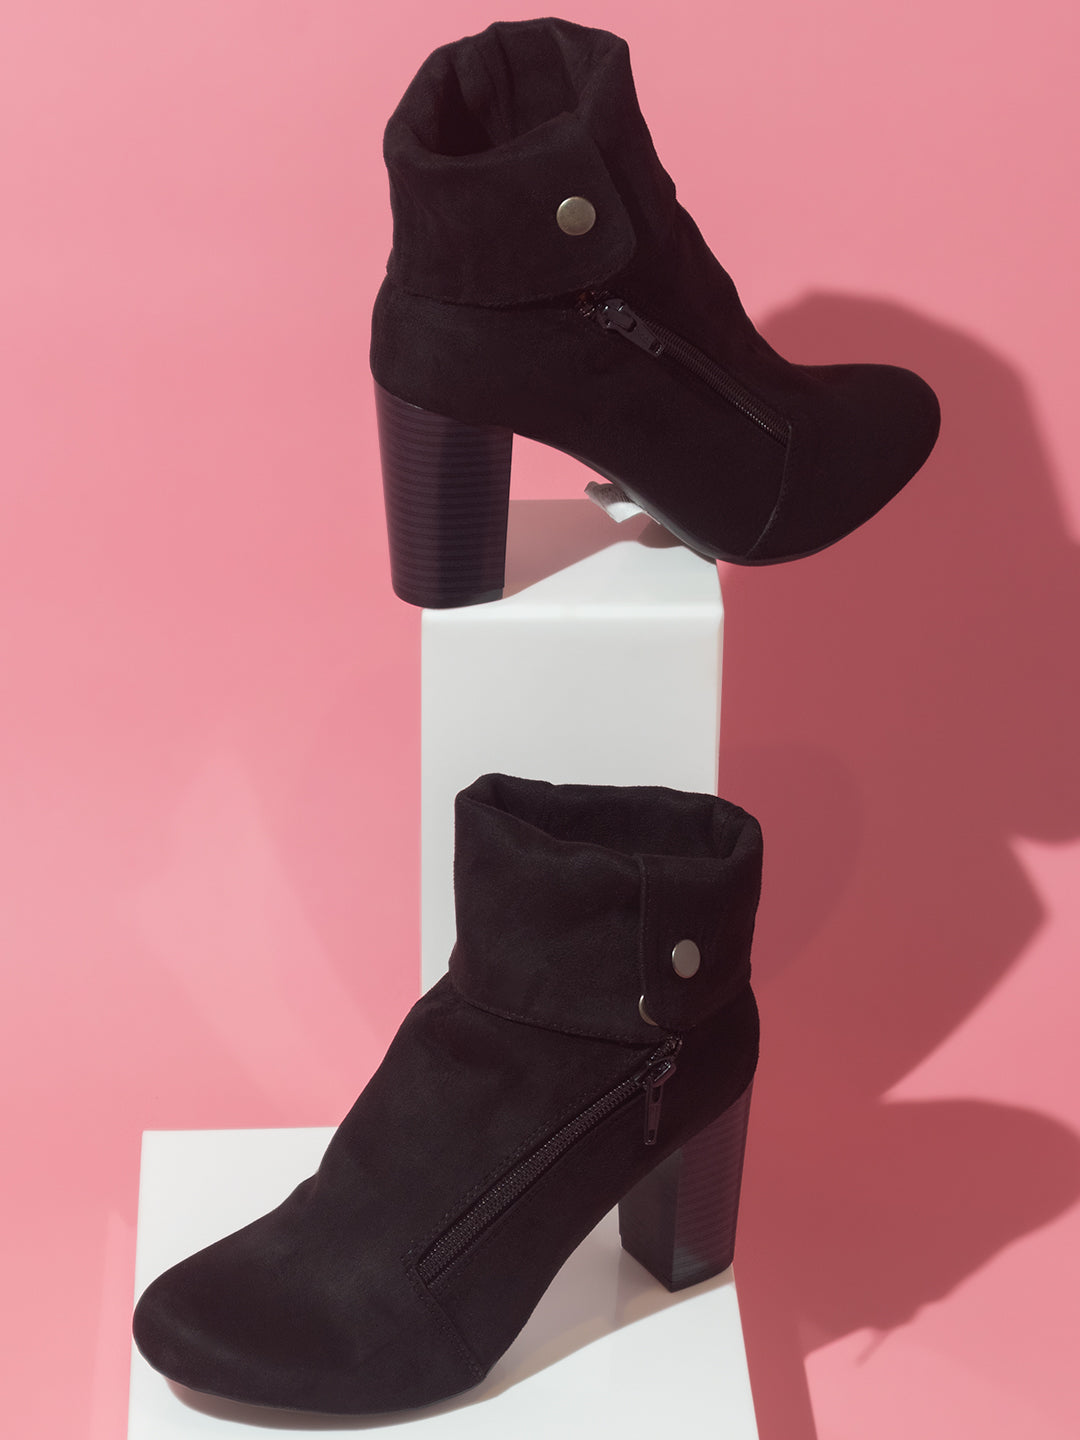 High Toe Shoes Heels Boots for Women Ankle Chunky India | Ubuy